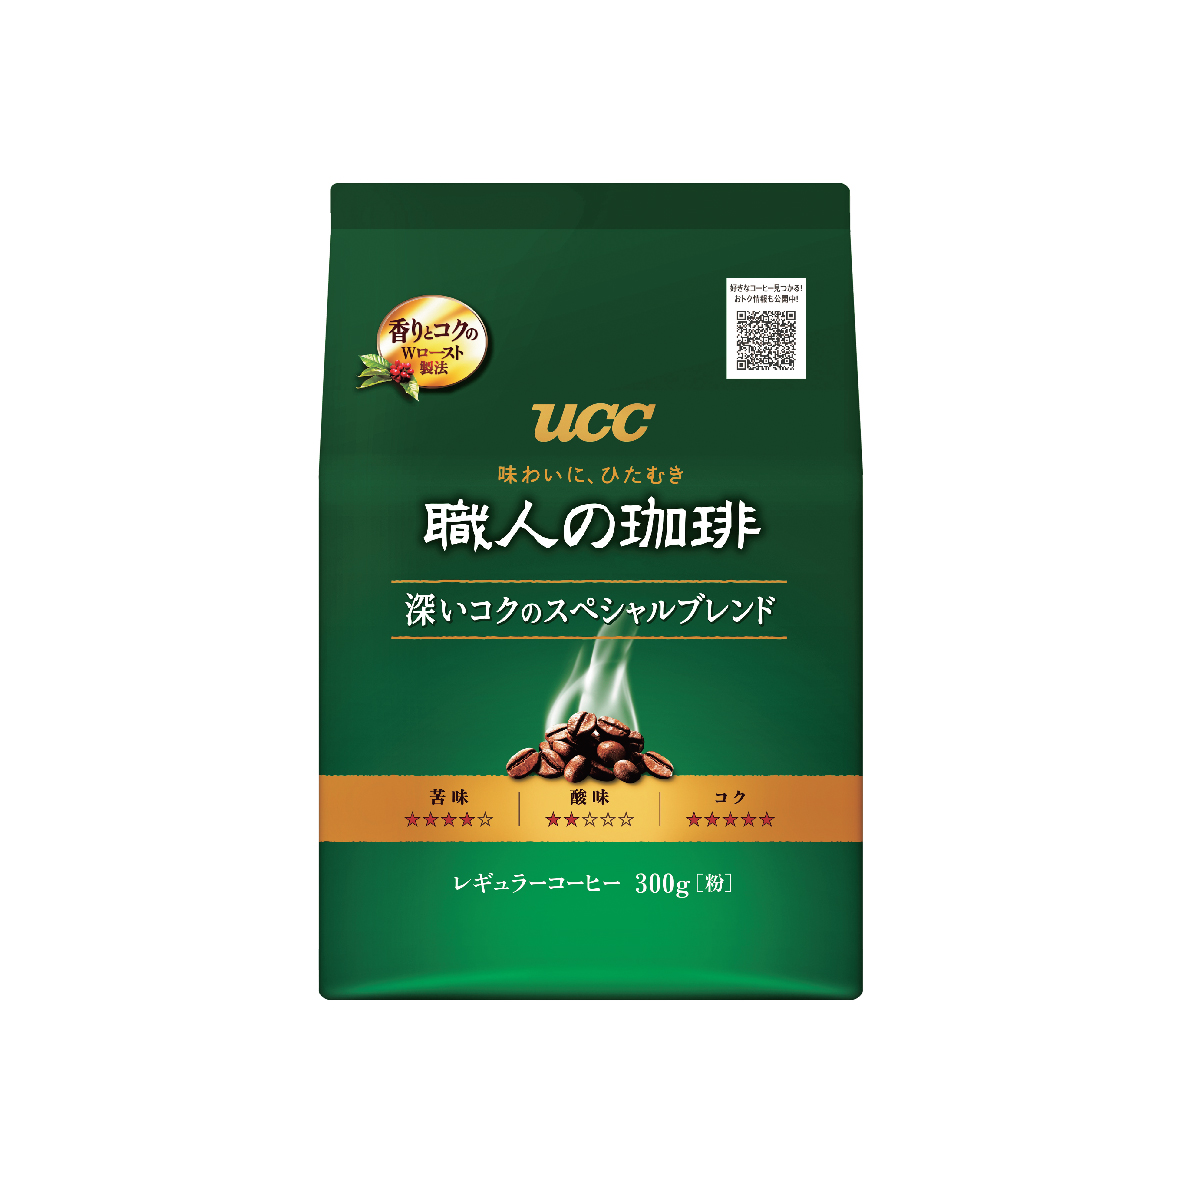 UCC Craftsman’s Coffee Rich Roasted Coffee